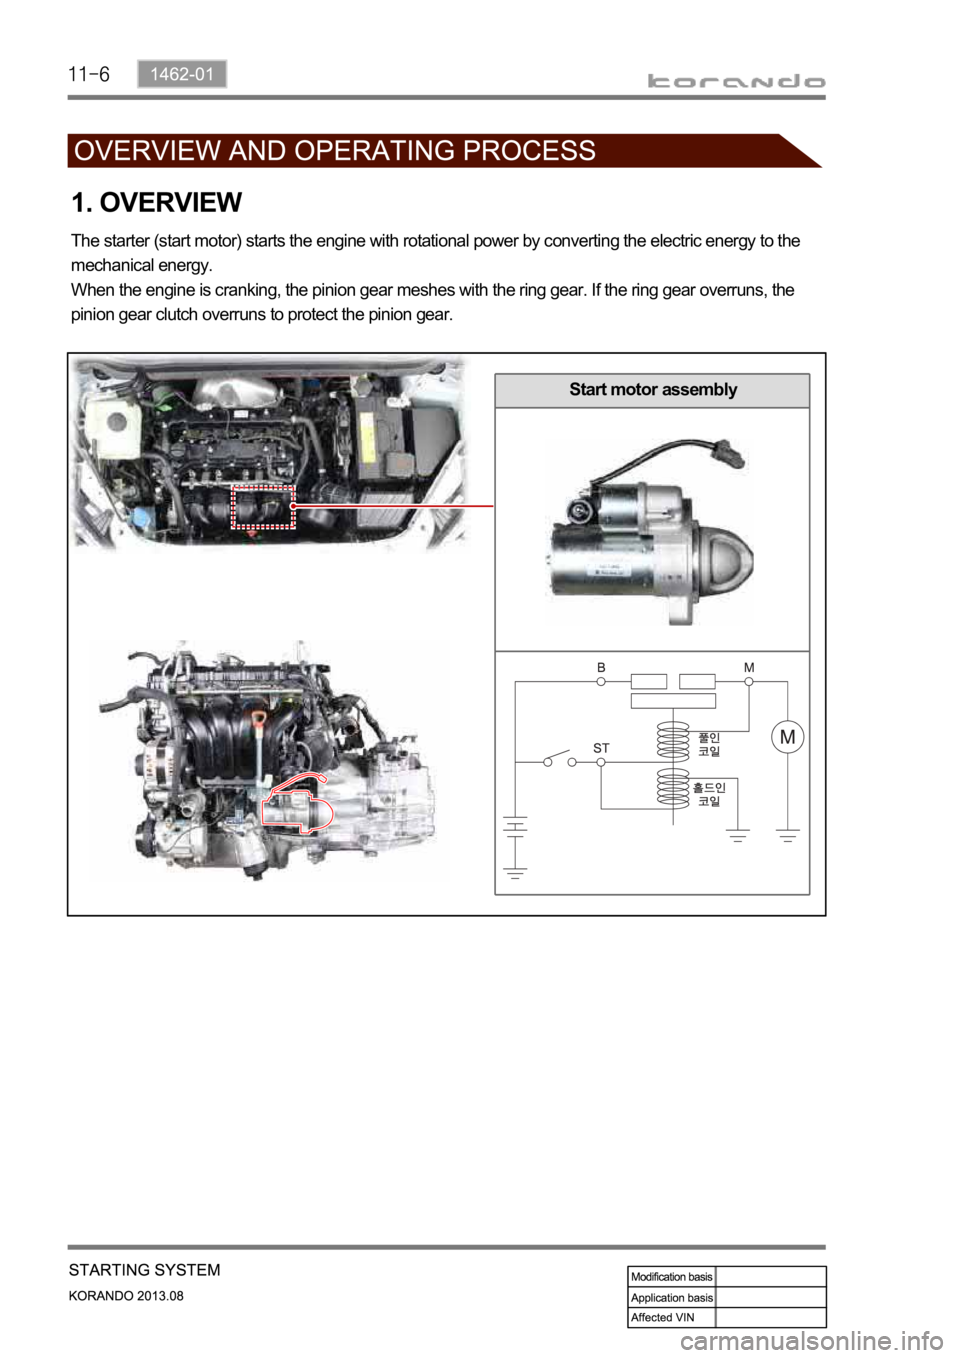 SSANGYONG KORANDO 2013  Service Manual Start motor assembly
1. OVERVIEW
The starter (start motor) starts the engine with rotational power by converting the electric energy to the 
mechanical energy.
When the engine is cranking, the pinion 